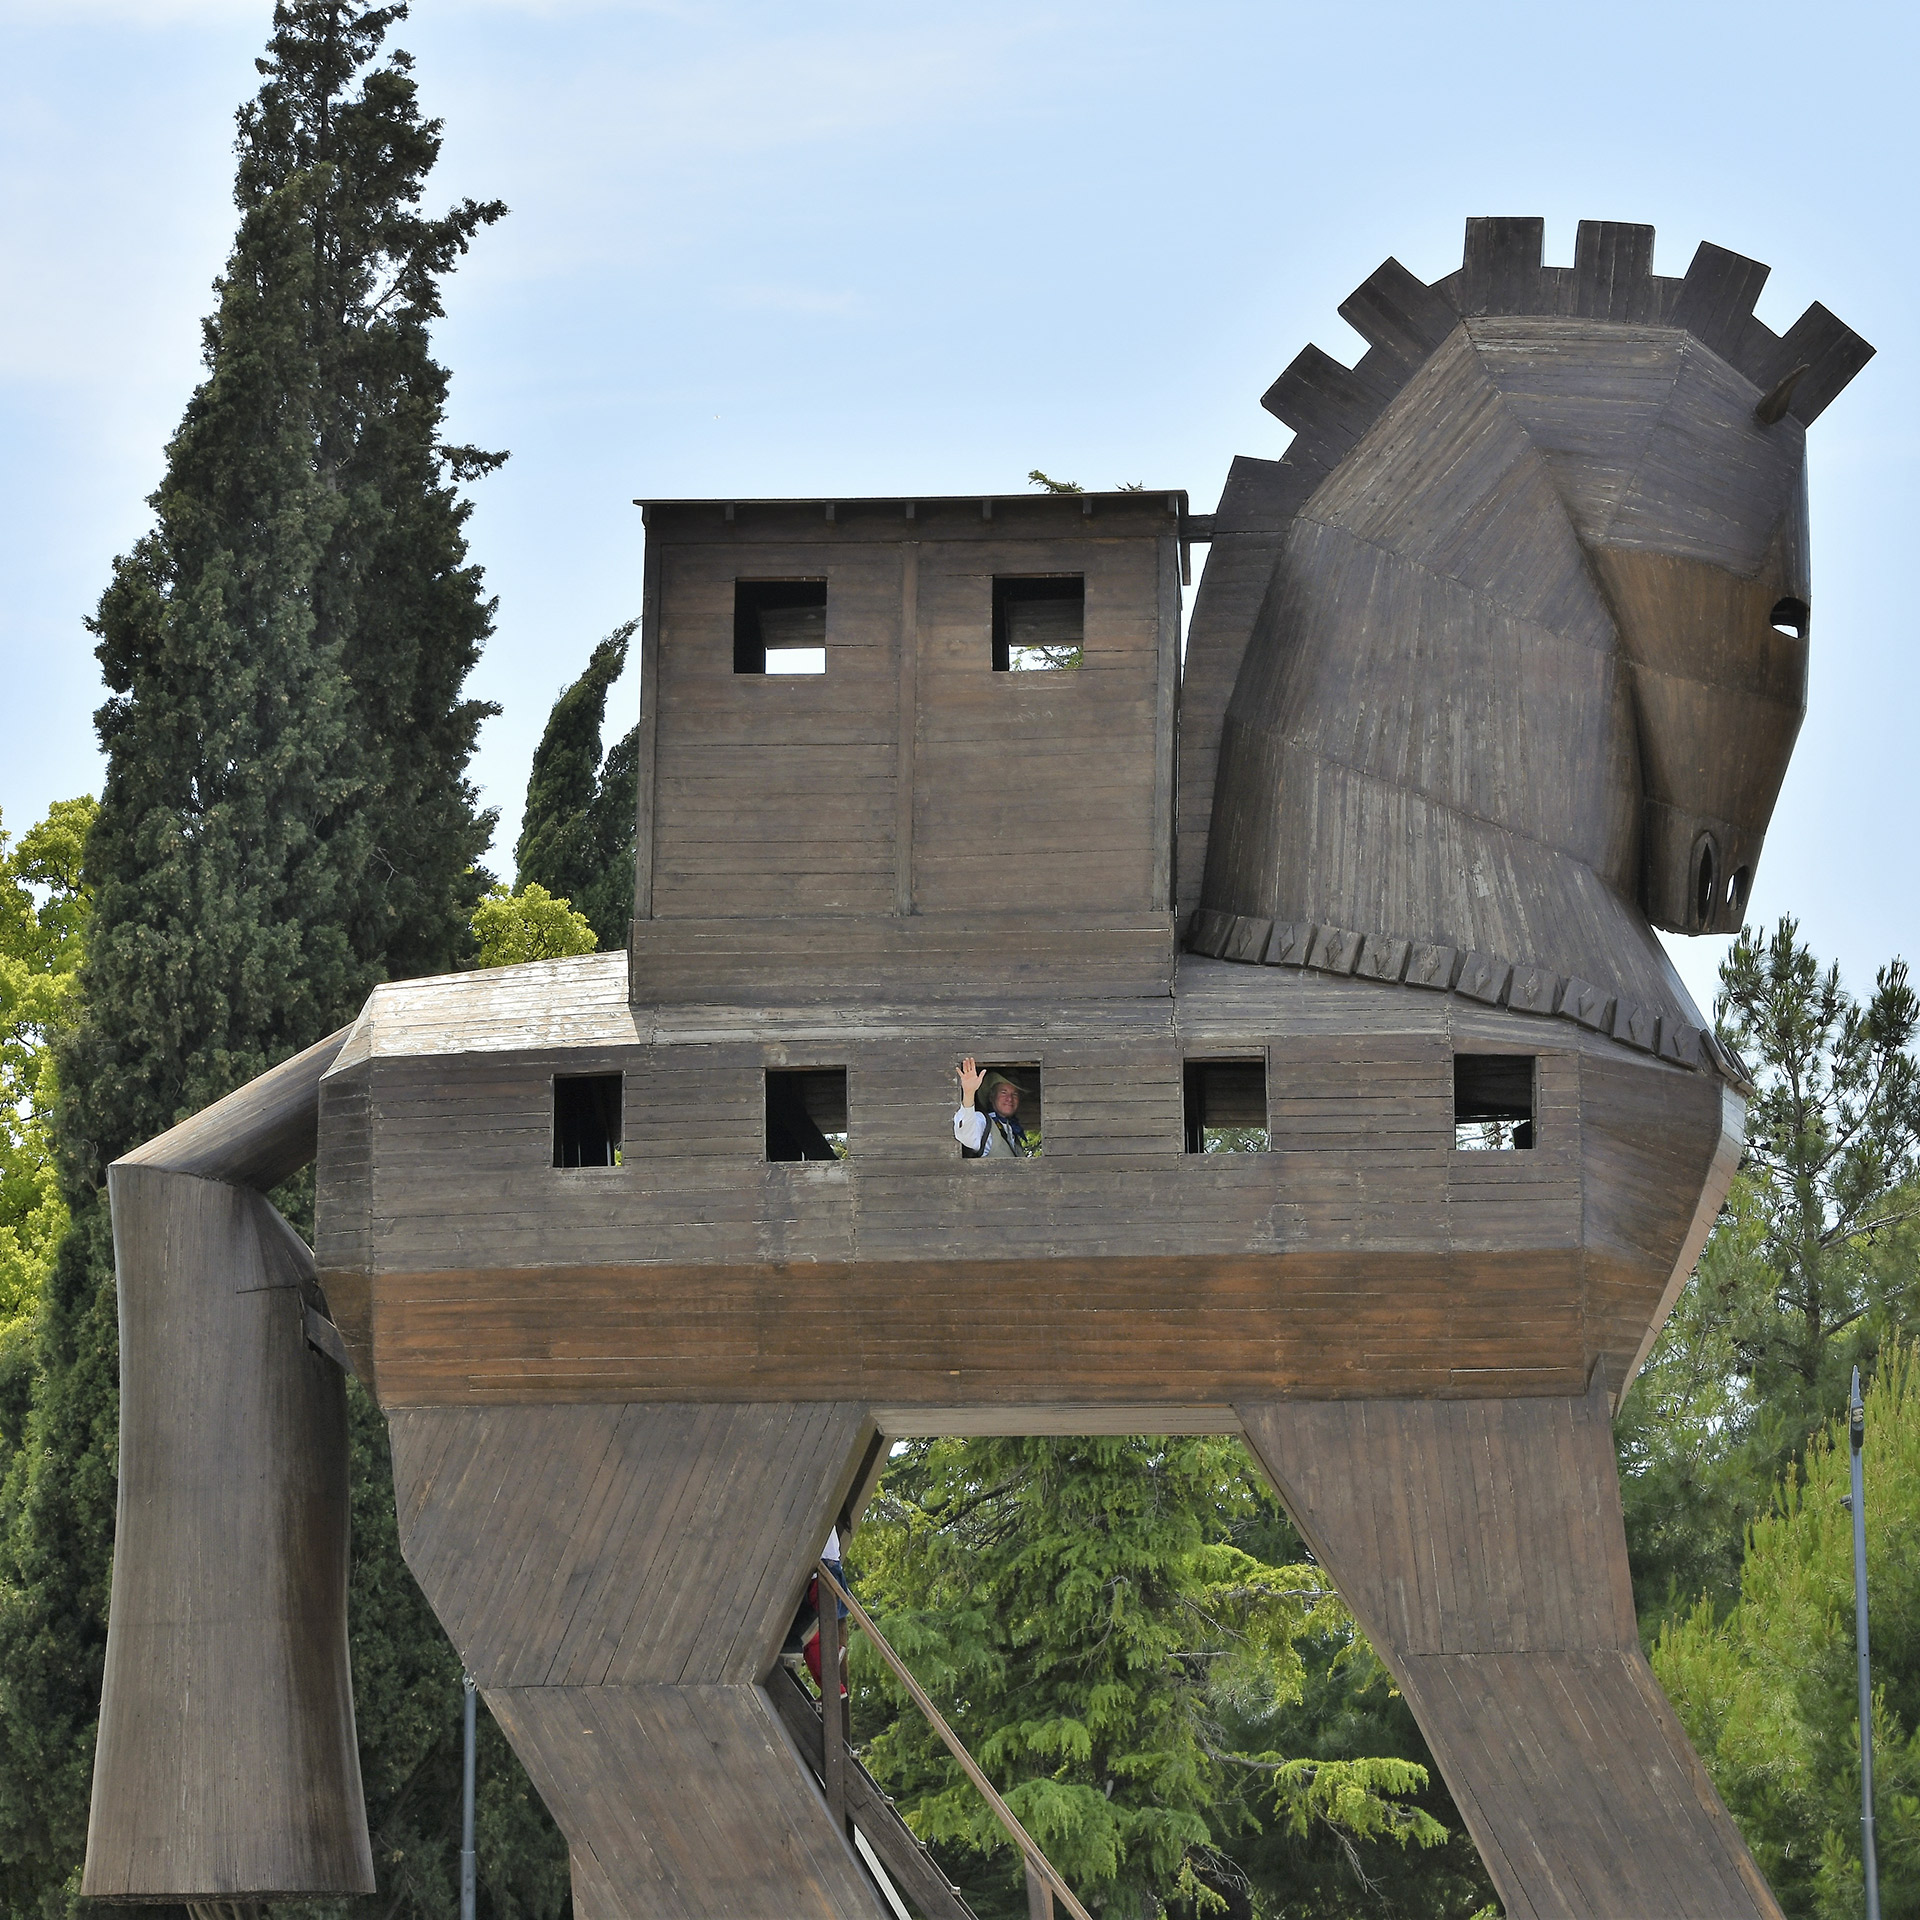 trojan horse announcement for Greece travel with Stratton Horres